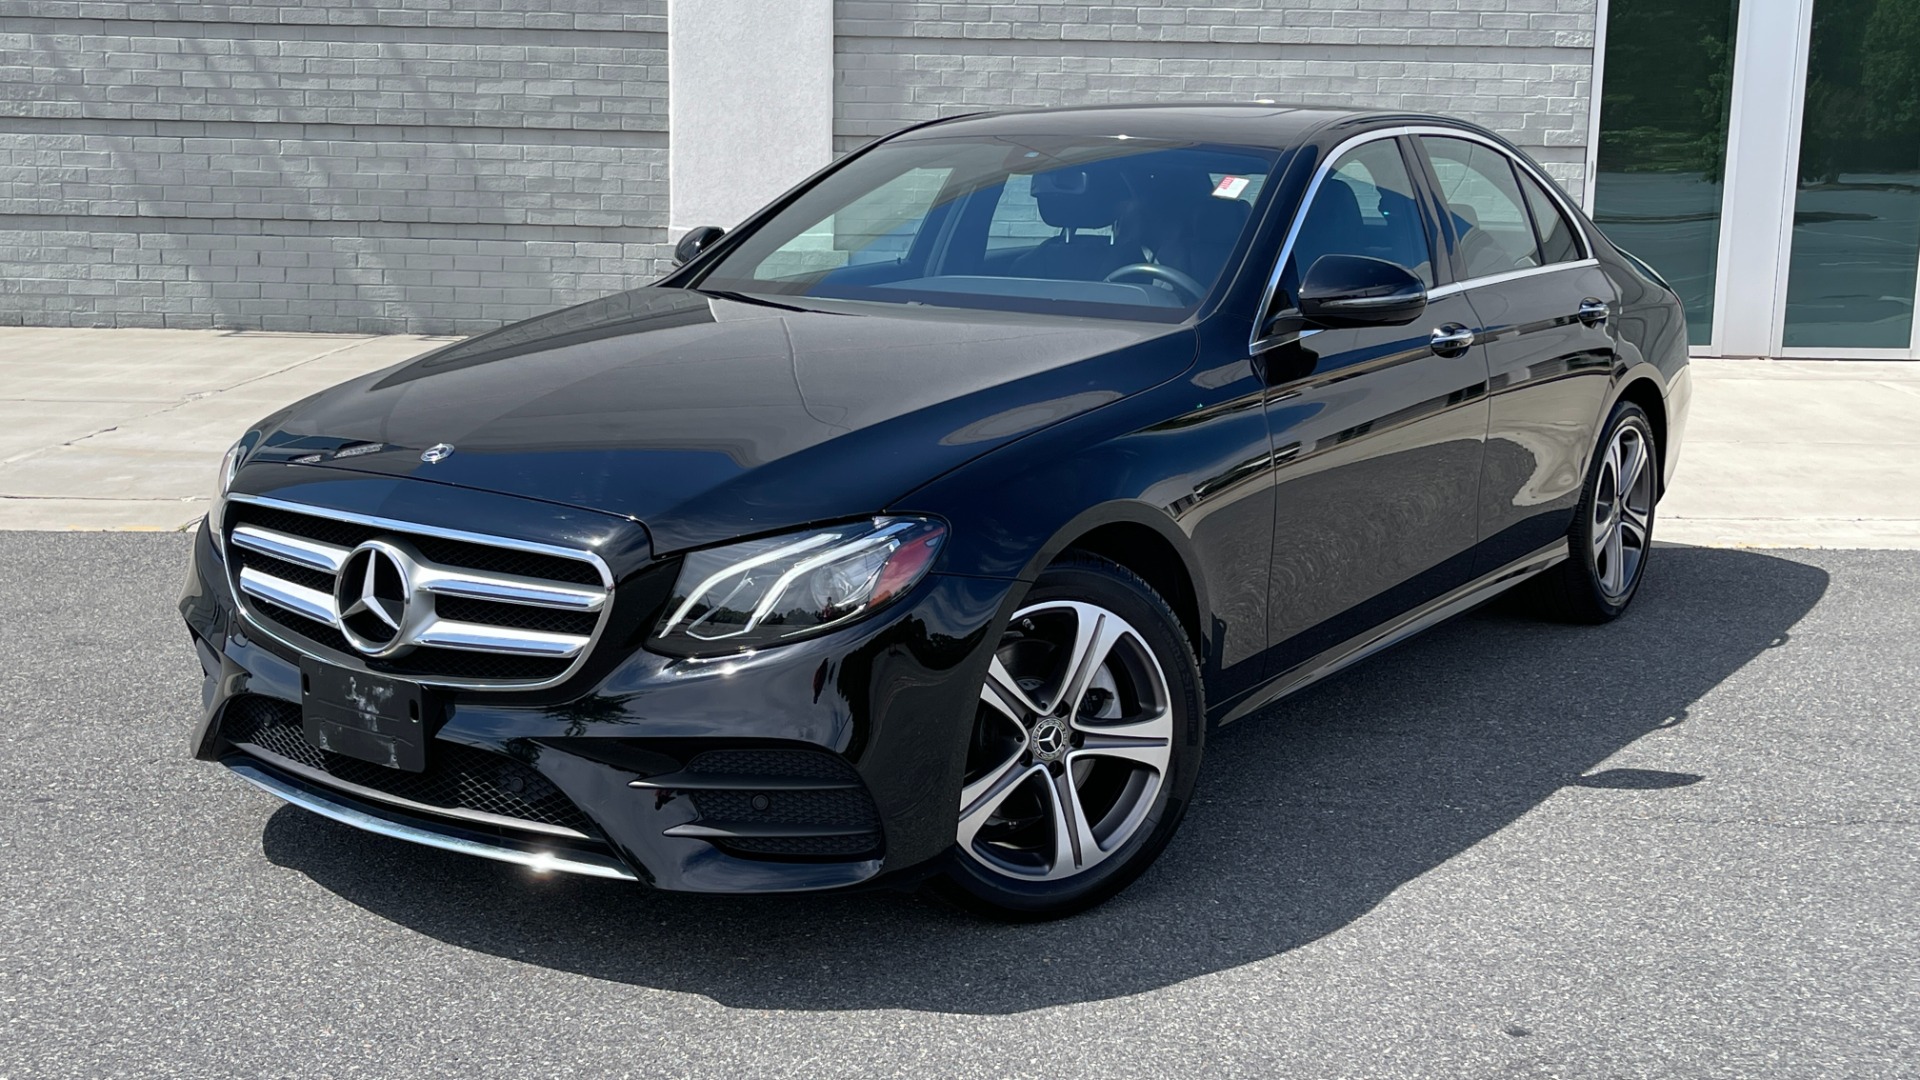 Used 2019 Mercedes-Benz E-Class E300 / 4MATIC / BURMESTER SOUND / PREMIUM PACKAGE / BLIND SPOT ASSIST for sale $39,395 at Formula Imports in Charlotte NC 28227 44